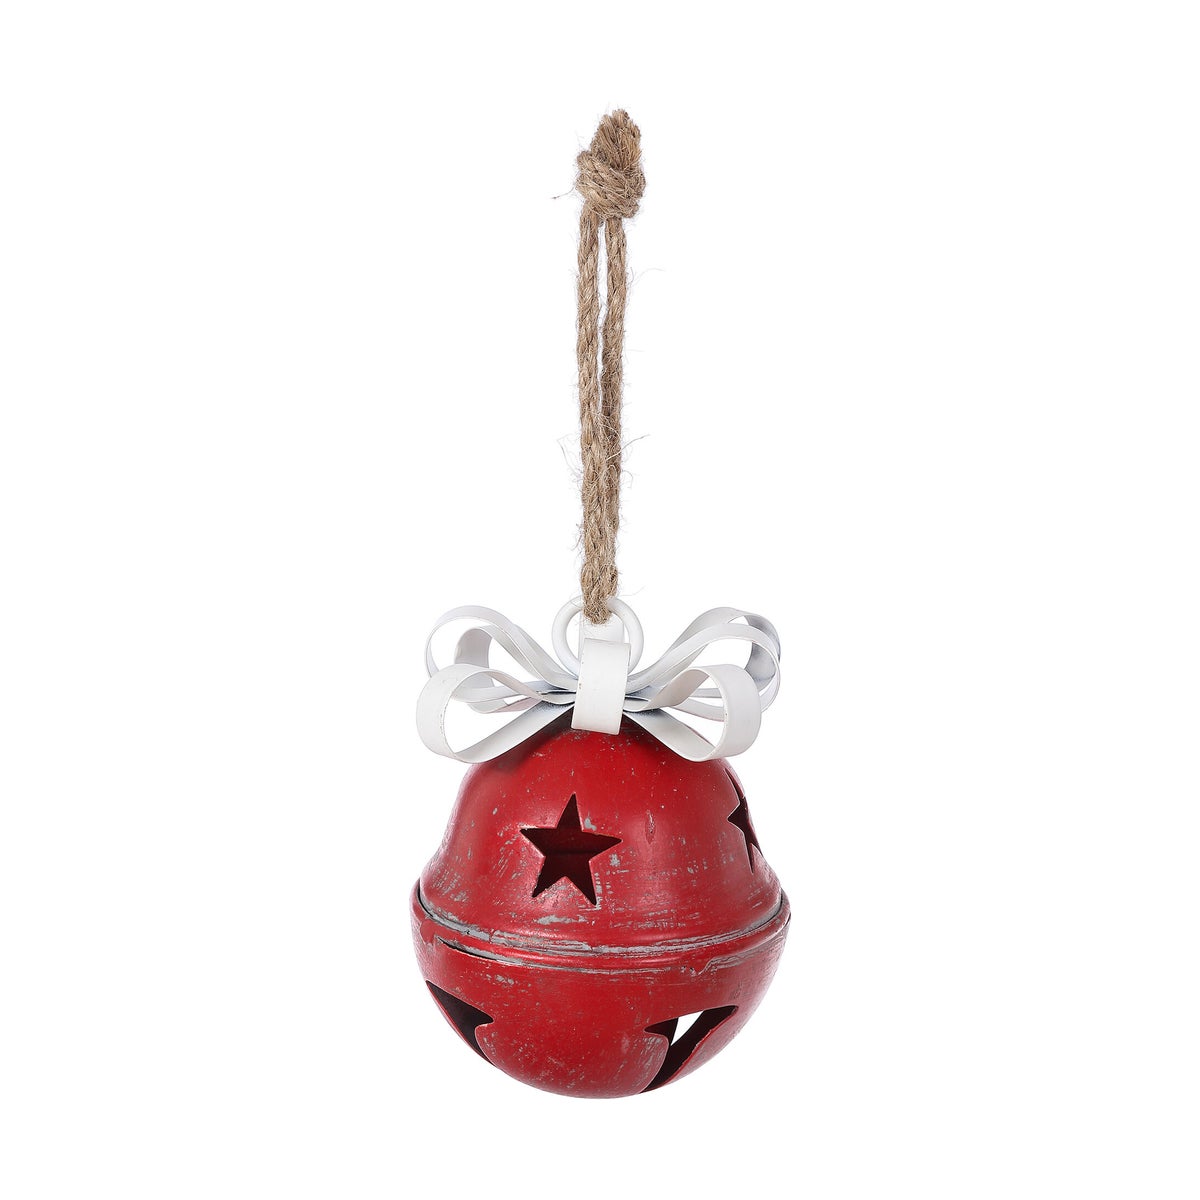 Mtl Red Wash Star Bell W/Bow Hang